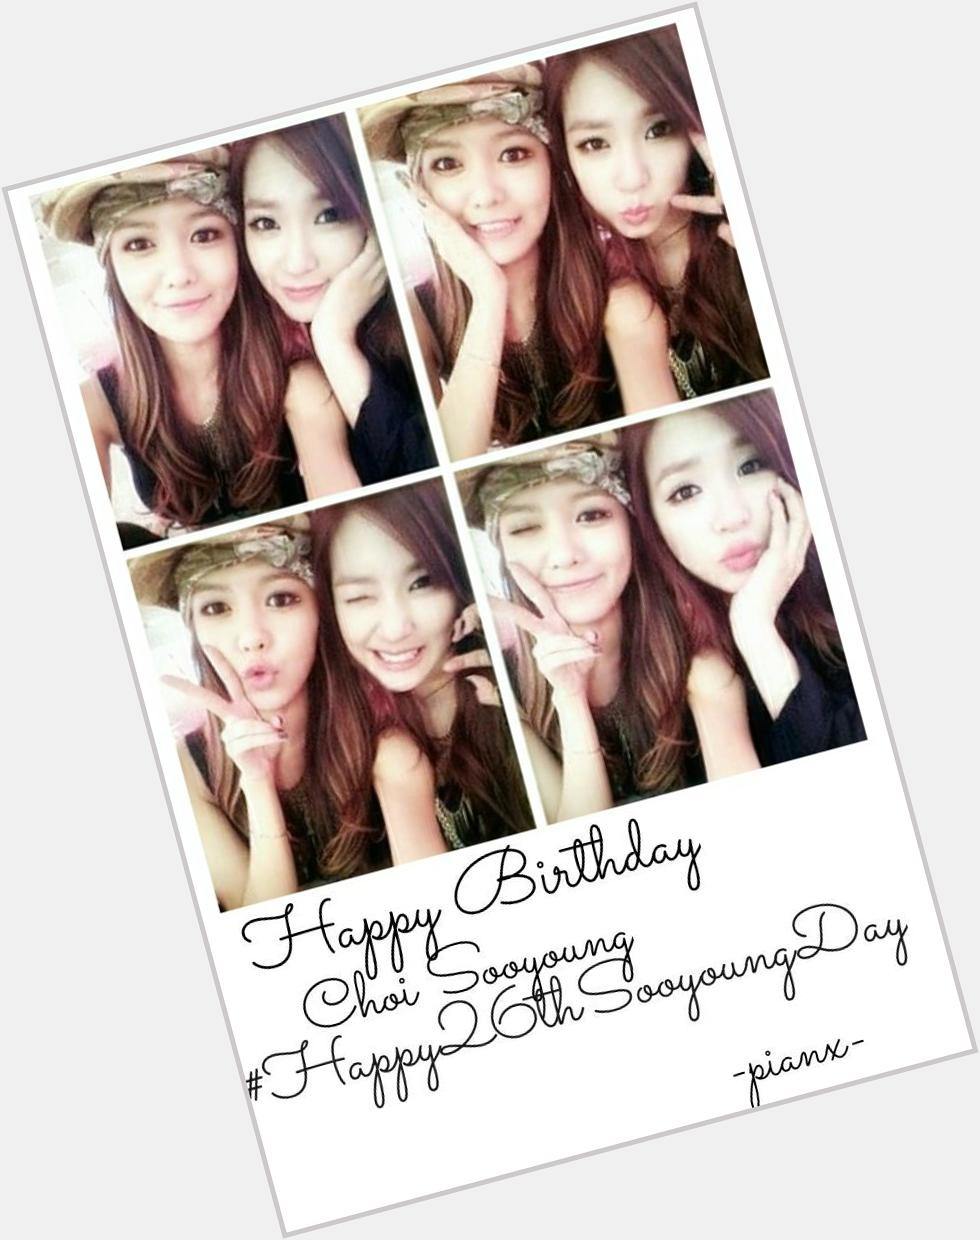 Happy Birthday for Choi Sooyoung real/rp!   